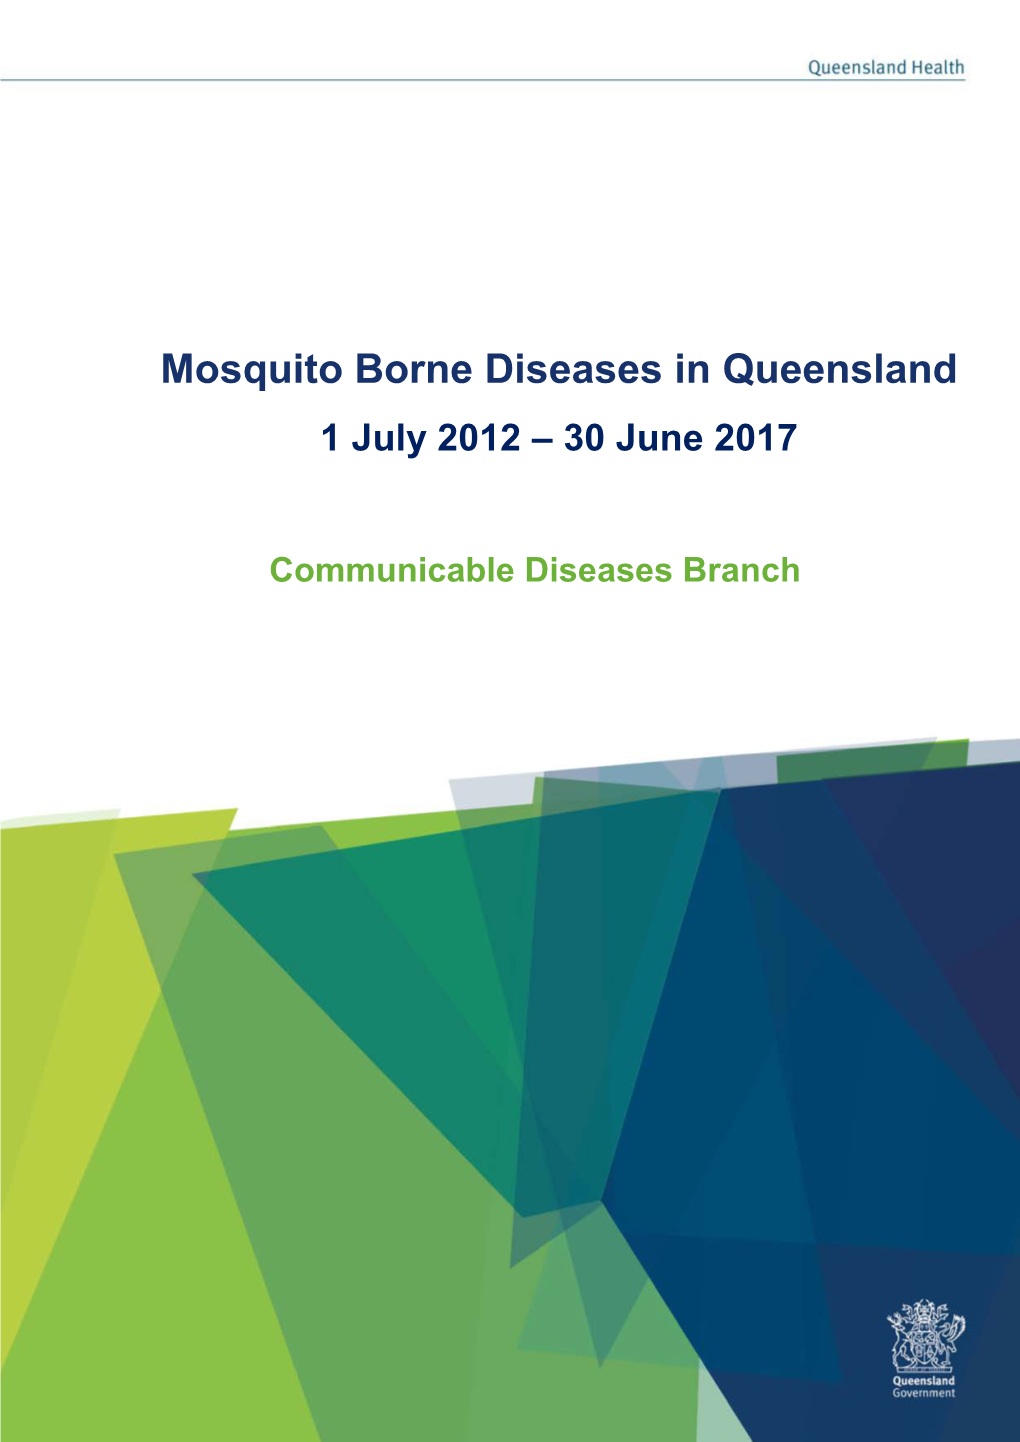 Mosquito-Borne Diseases in Queensland Annual Report 1 July